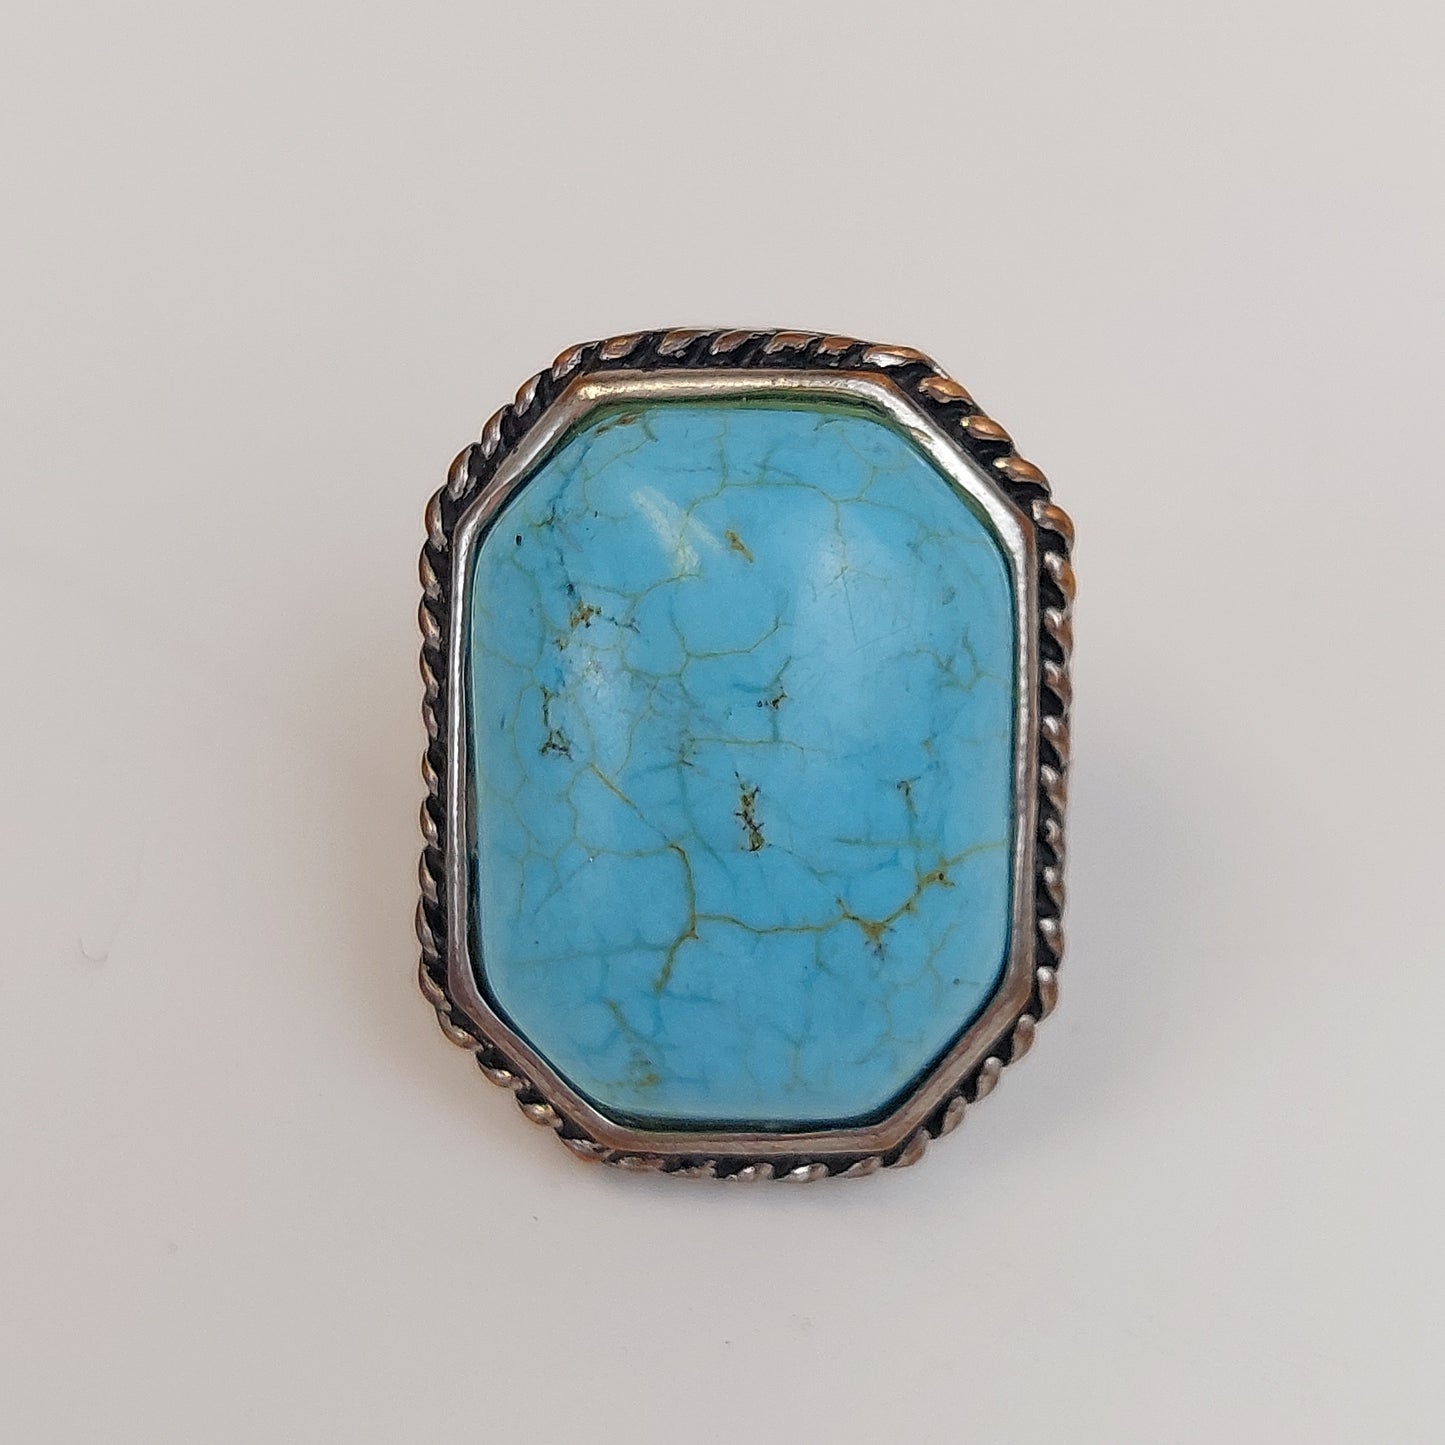 Vintage Howlite Turquoise and Coper Adjustable Ring Size 6 to 7